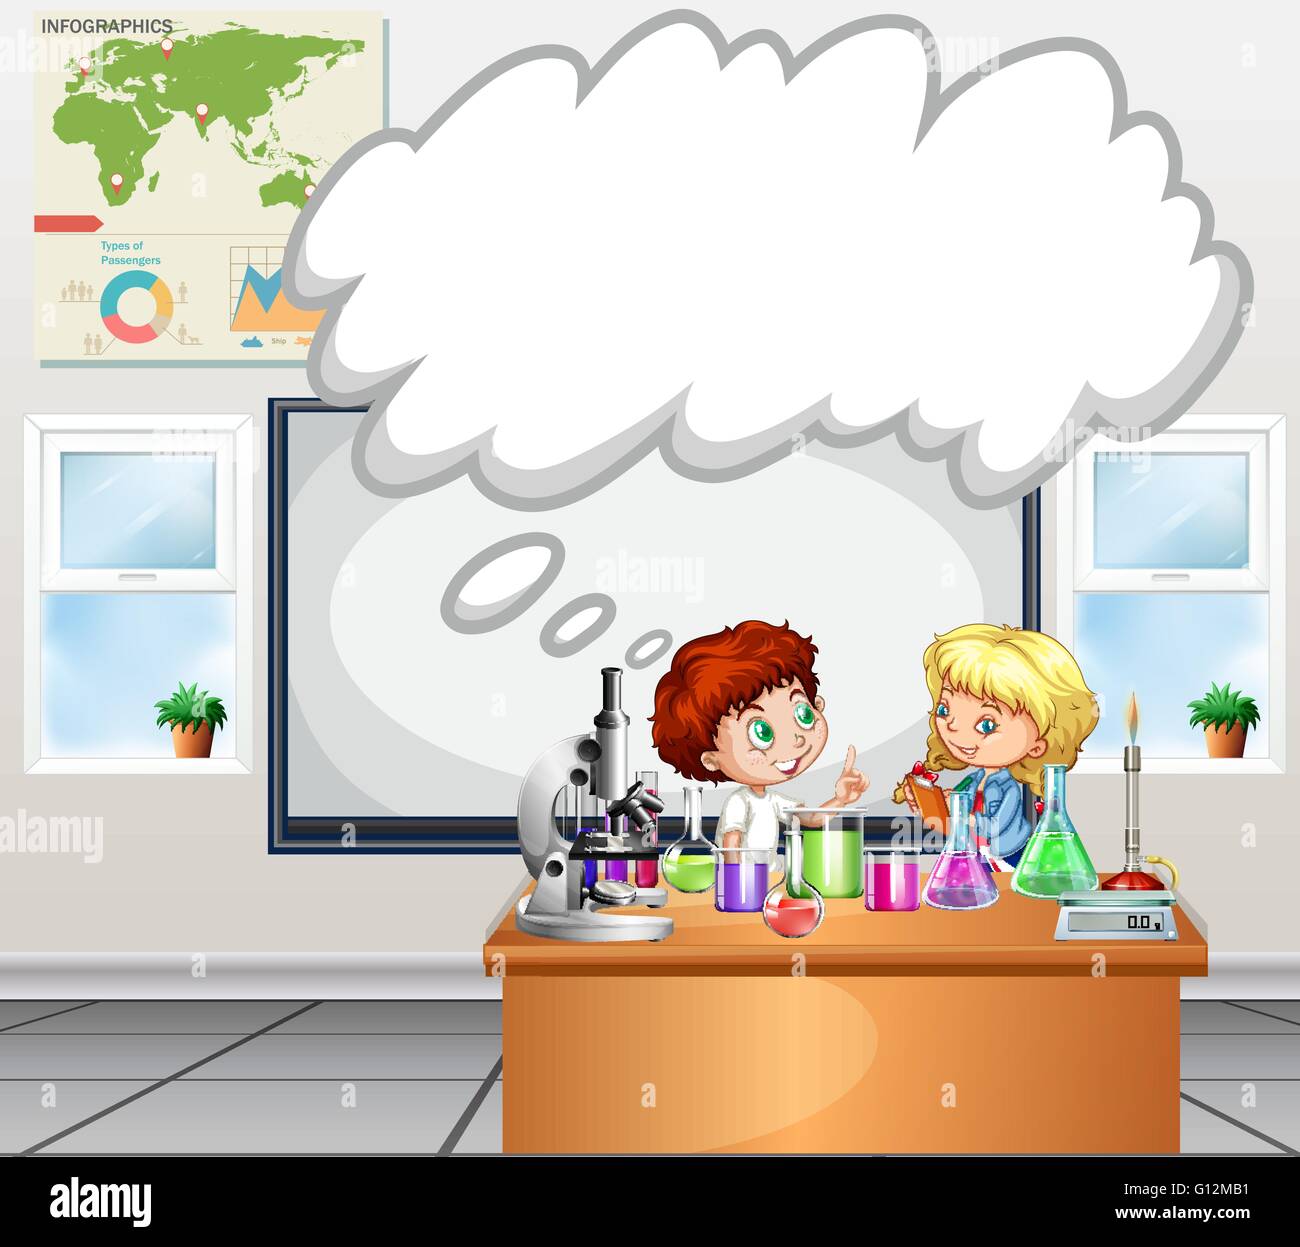 Children doing experiment in the classroom illustration Stock Vector